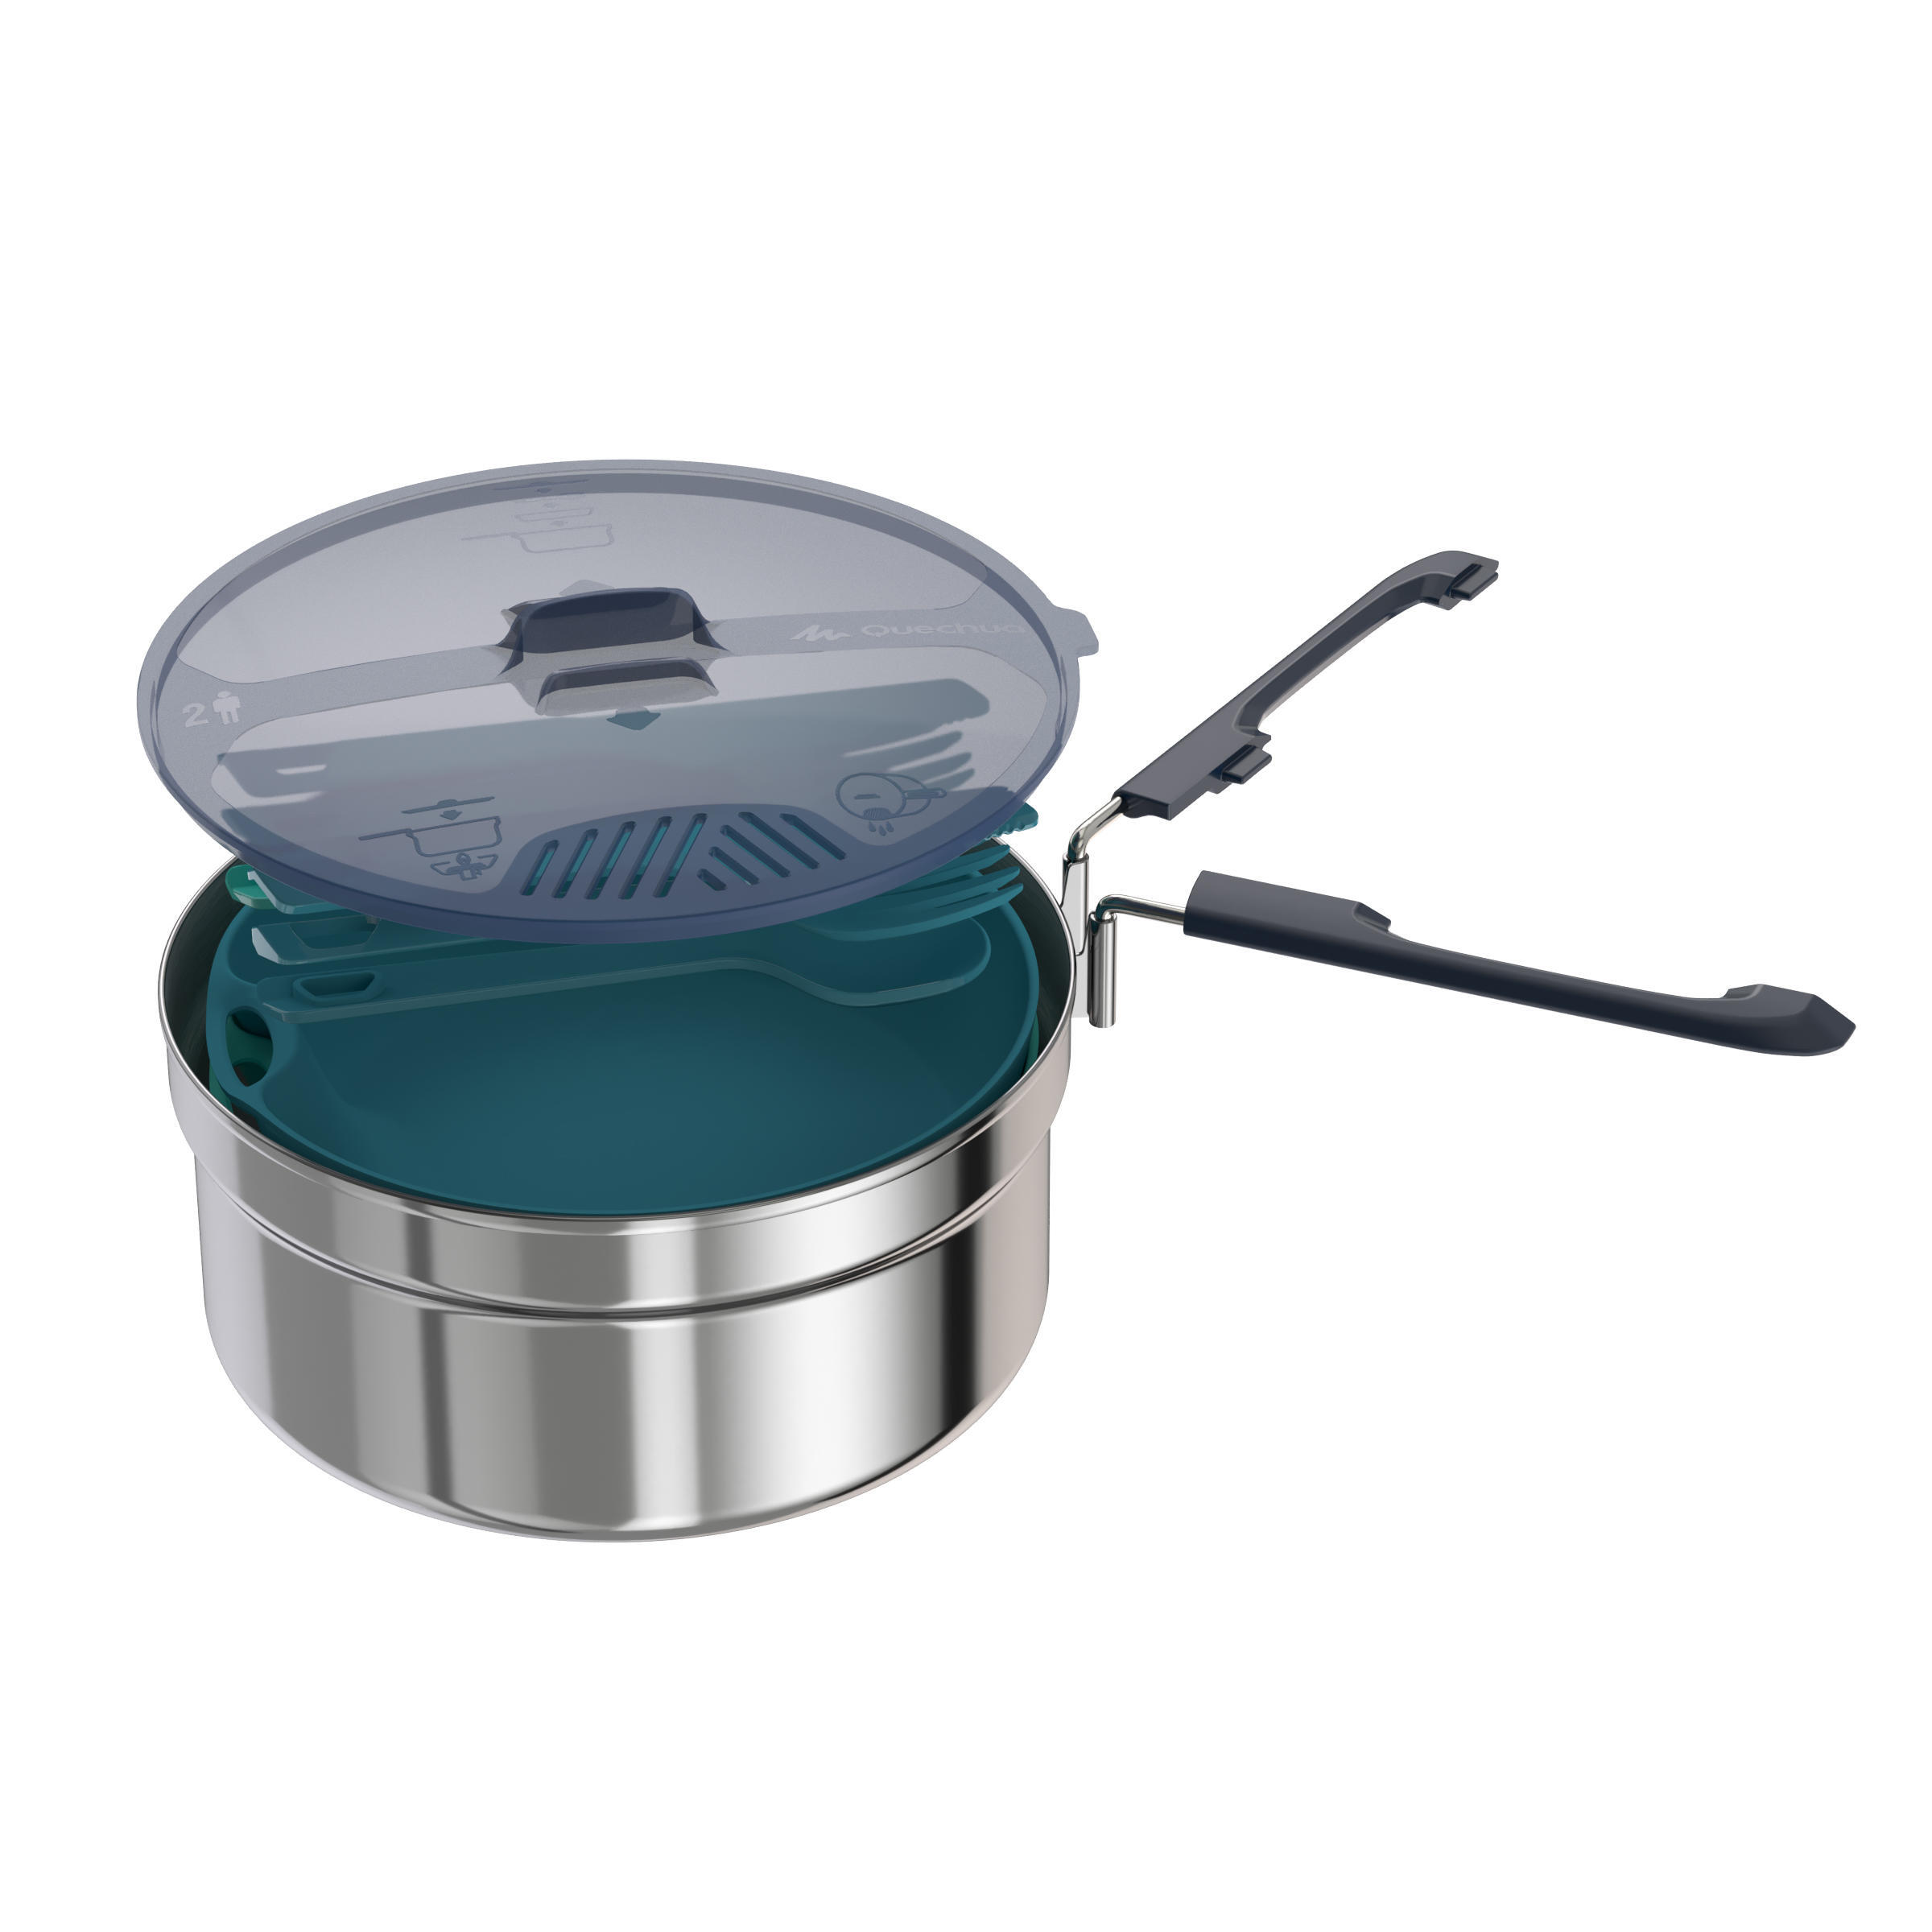 Hiker’s camping stainless steel cook set MH100 2 people (1.6 L) 6/11